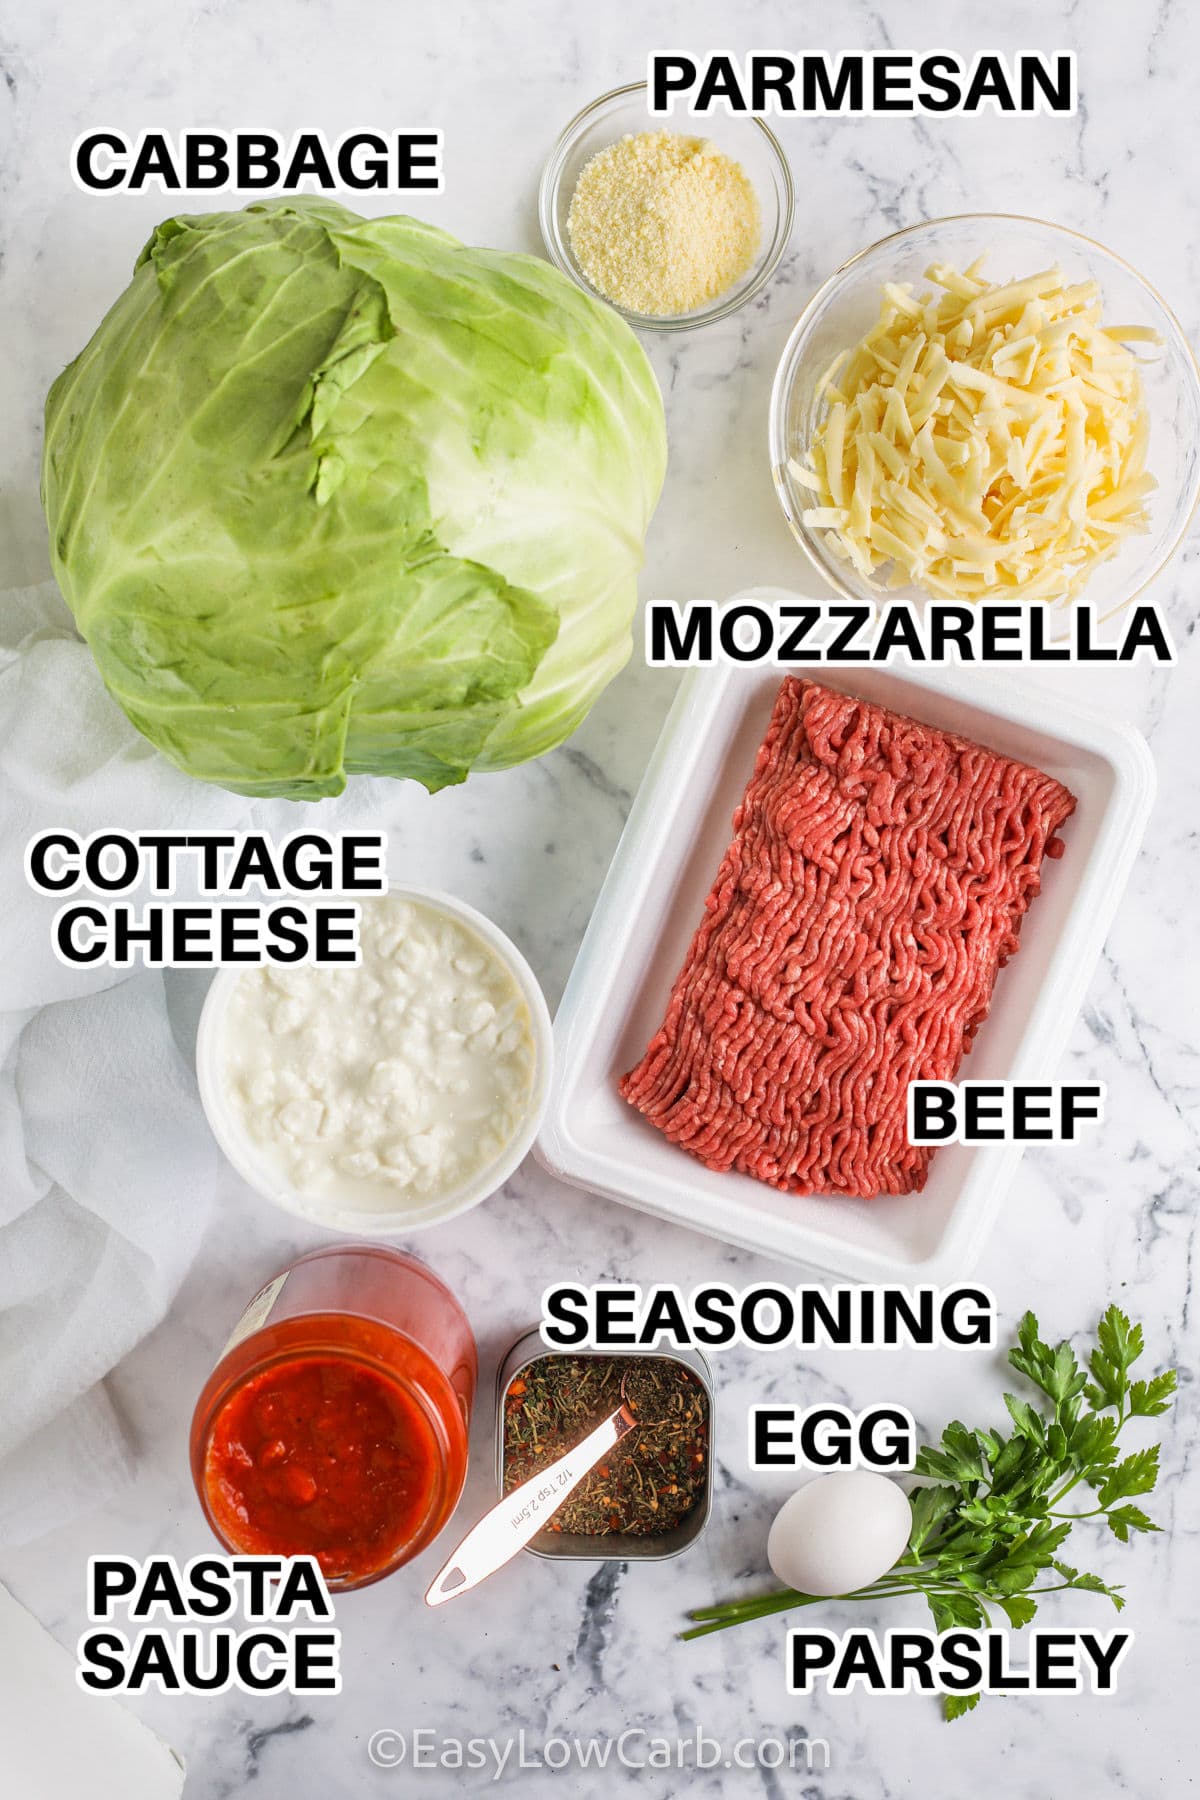 cabbage , cheese, beef , pasta sauce and seasonings to make Cabbage Lasagna with labels